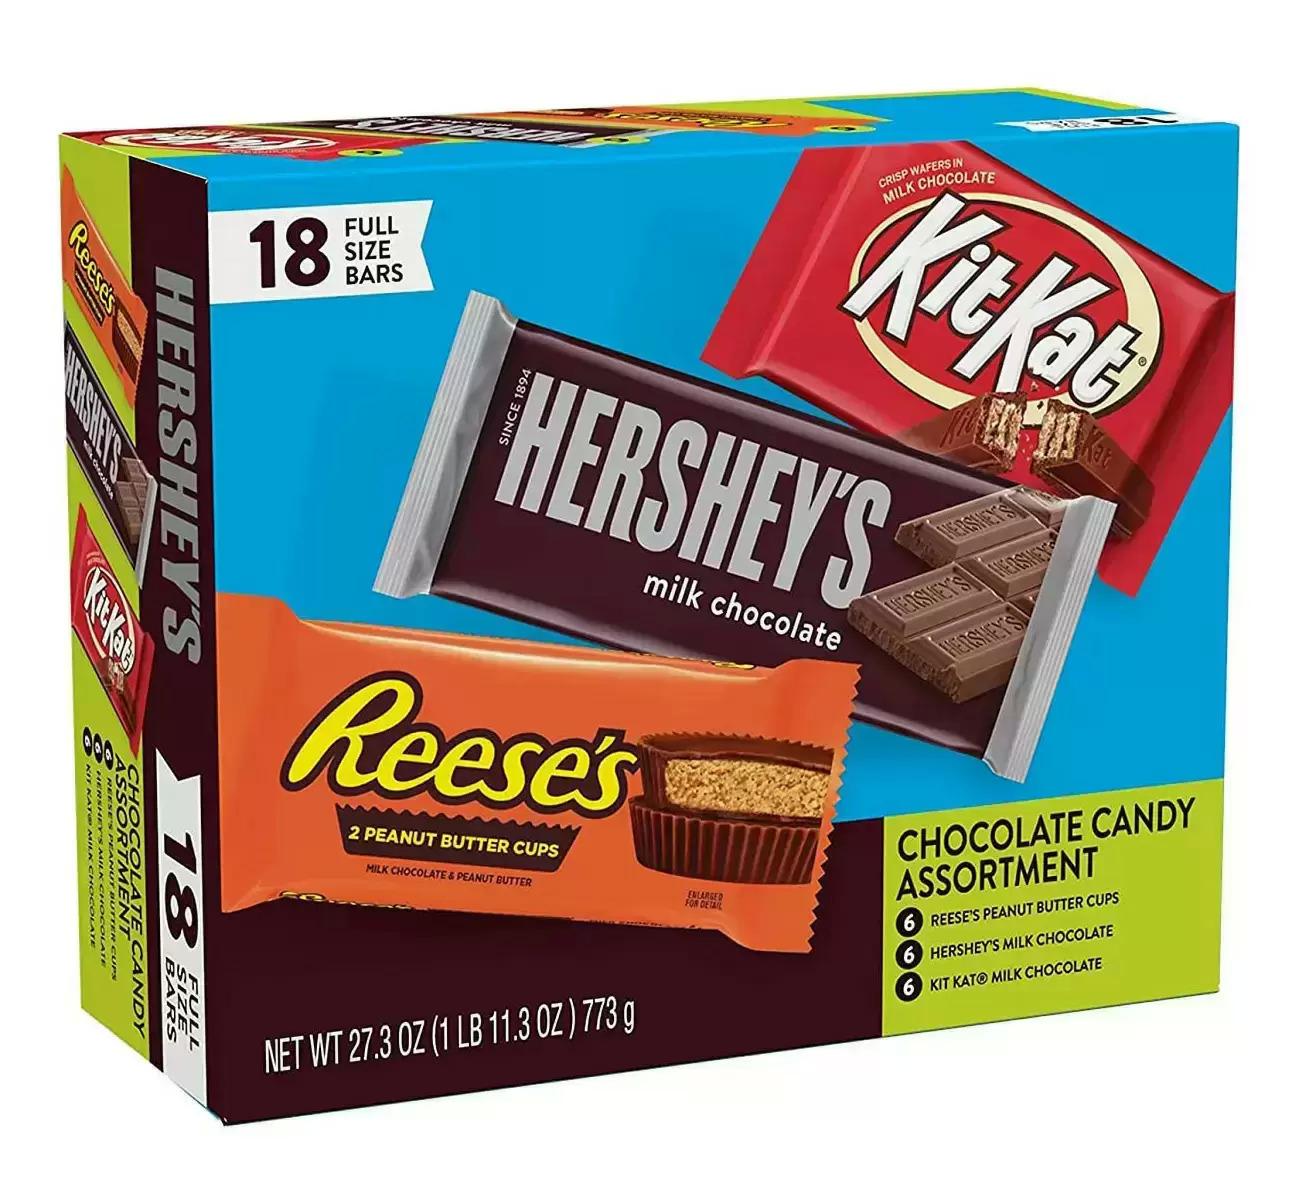 Hershey Full Size Candy Bar Assorted Variety Box for $13.50 Shipped